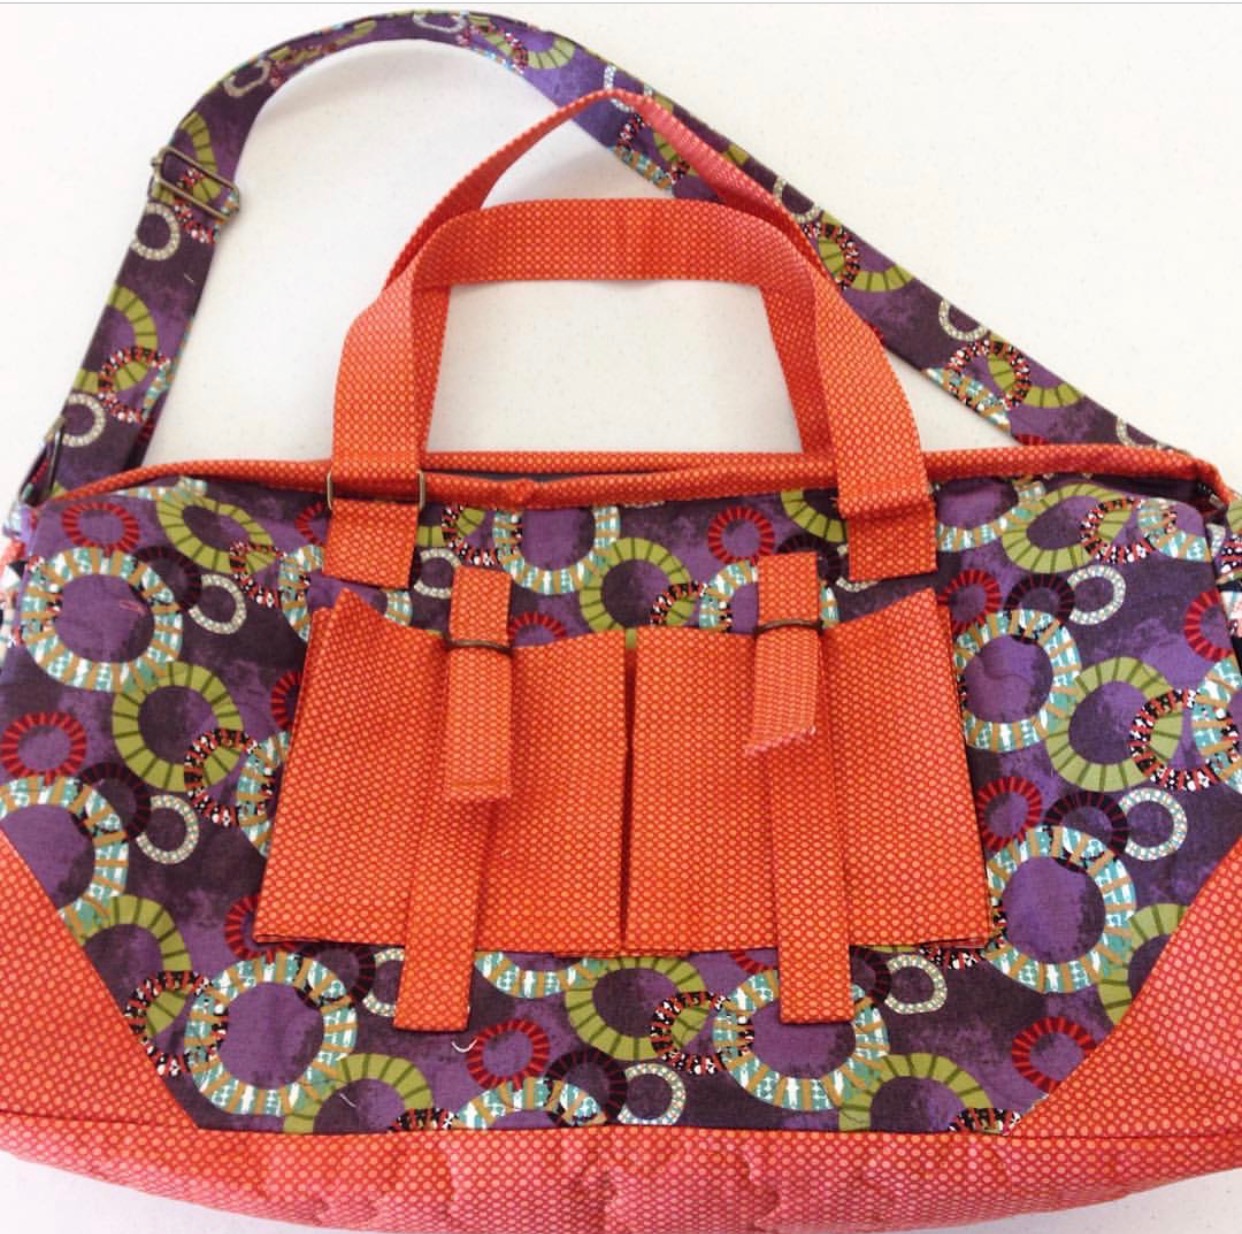 The Betsy Travel Bag - Sew Much Moore